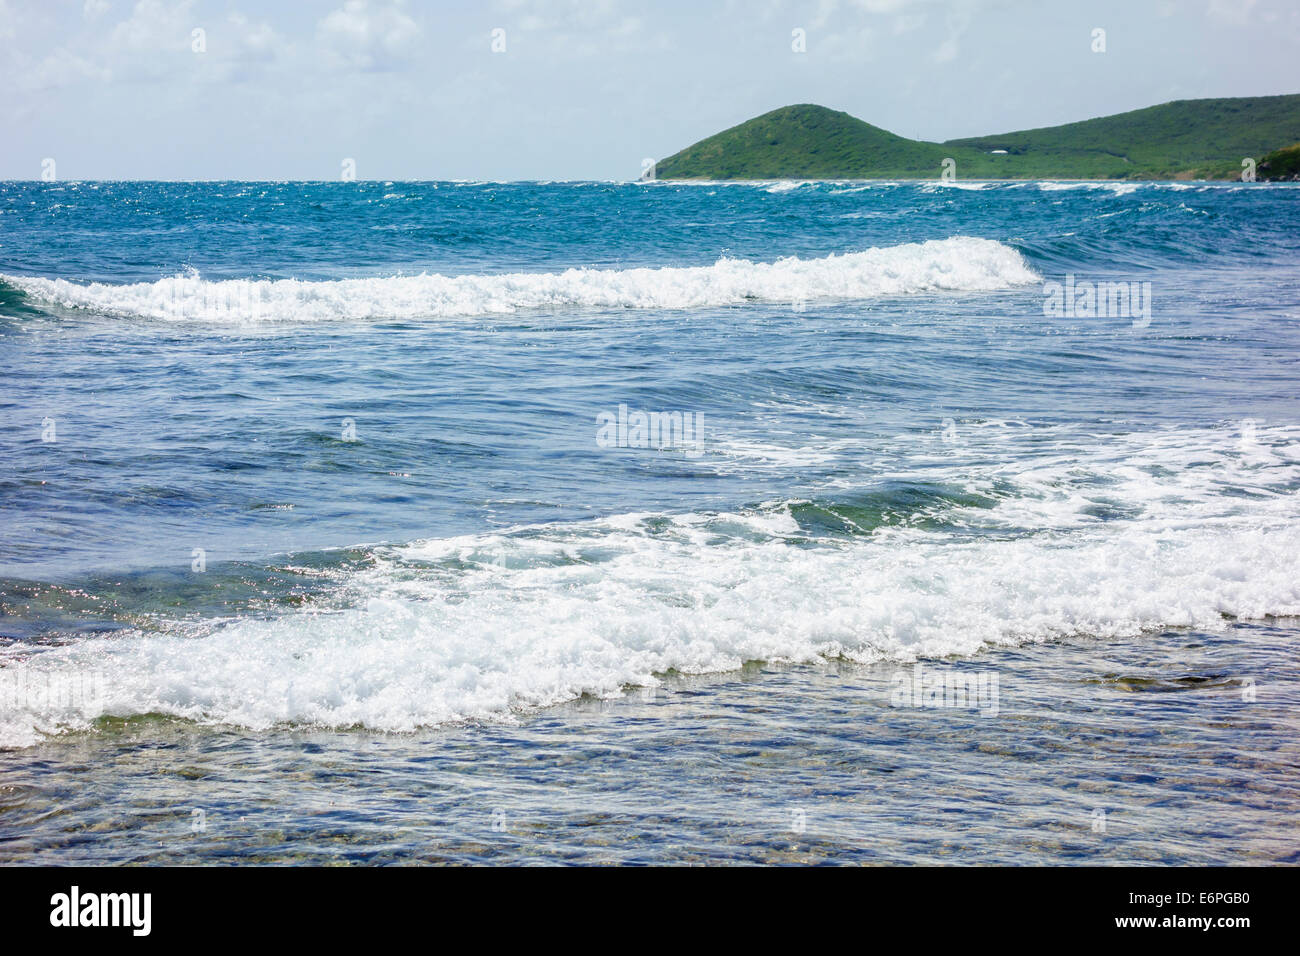 A view of the Caribbean sea from the east end of St. Croix, U. S. Virgin Islands. Mount Eagle is seen in the distance. USVI, U.S.V.I. Stock Photo